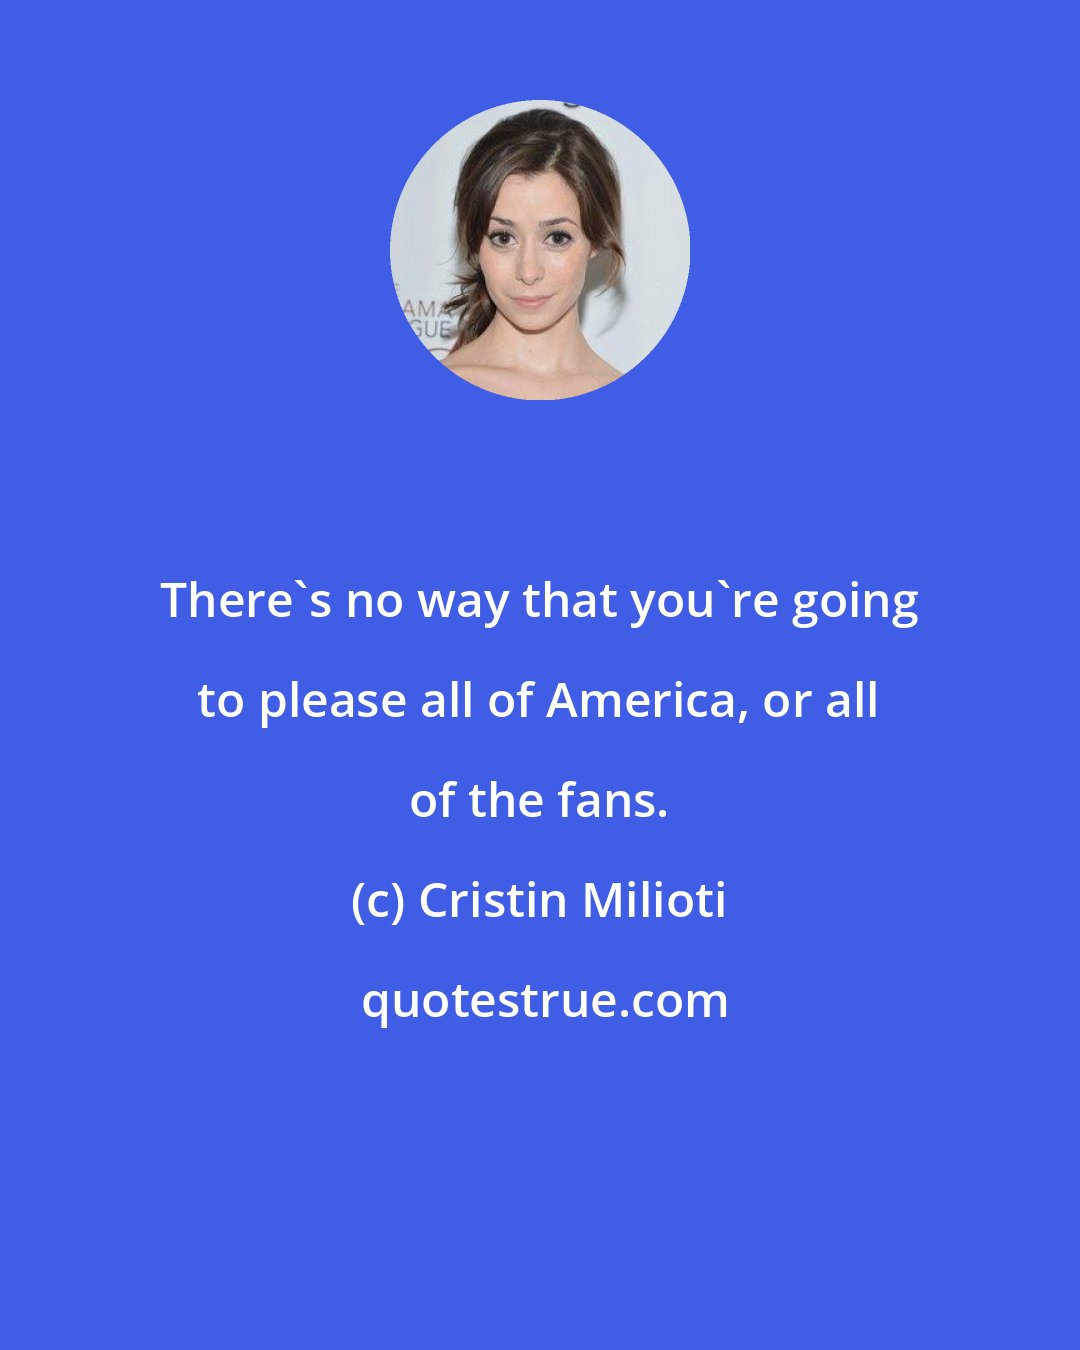 Cristin Milioti: There's no way that you're going to please all of America, or all of the fans.